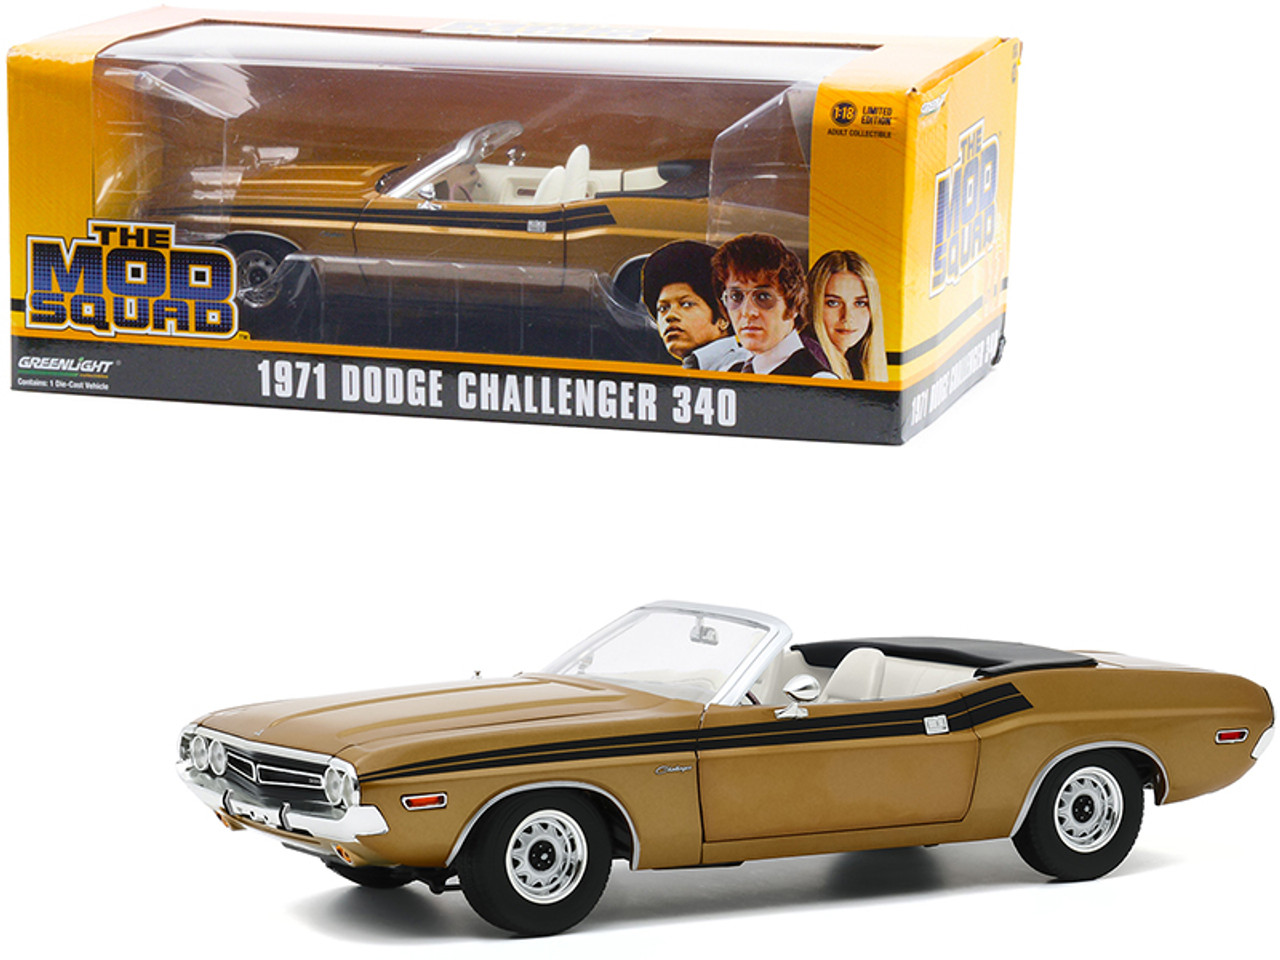 1971 Dodge Challenger 340 Convertible Gold with White Interior and Black Stripes "The Mod Squad" (1968-1973) TV Series 1/18 Diecast Model Car by Greenlight